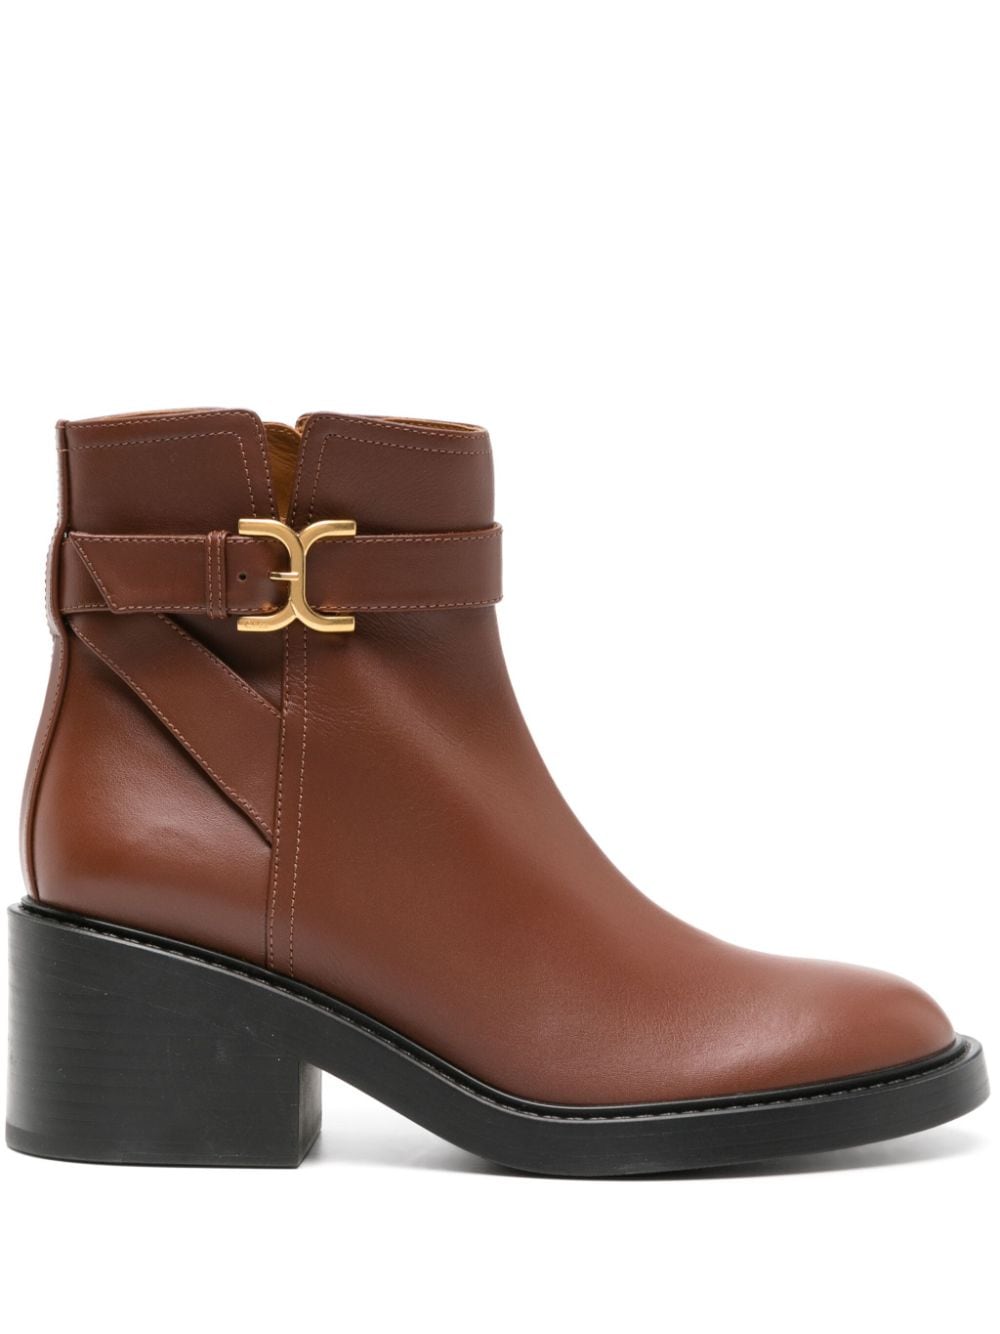 Chloé Marcie 60mm leather boots